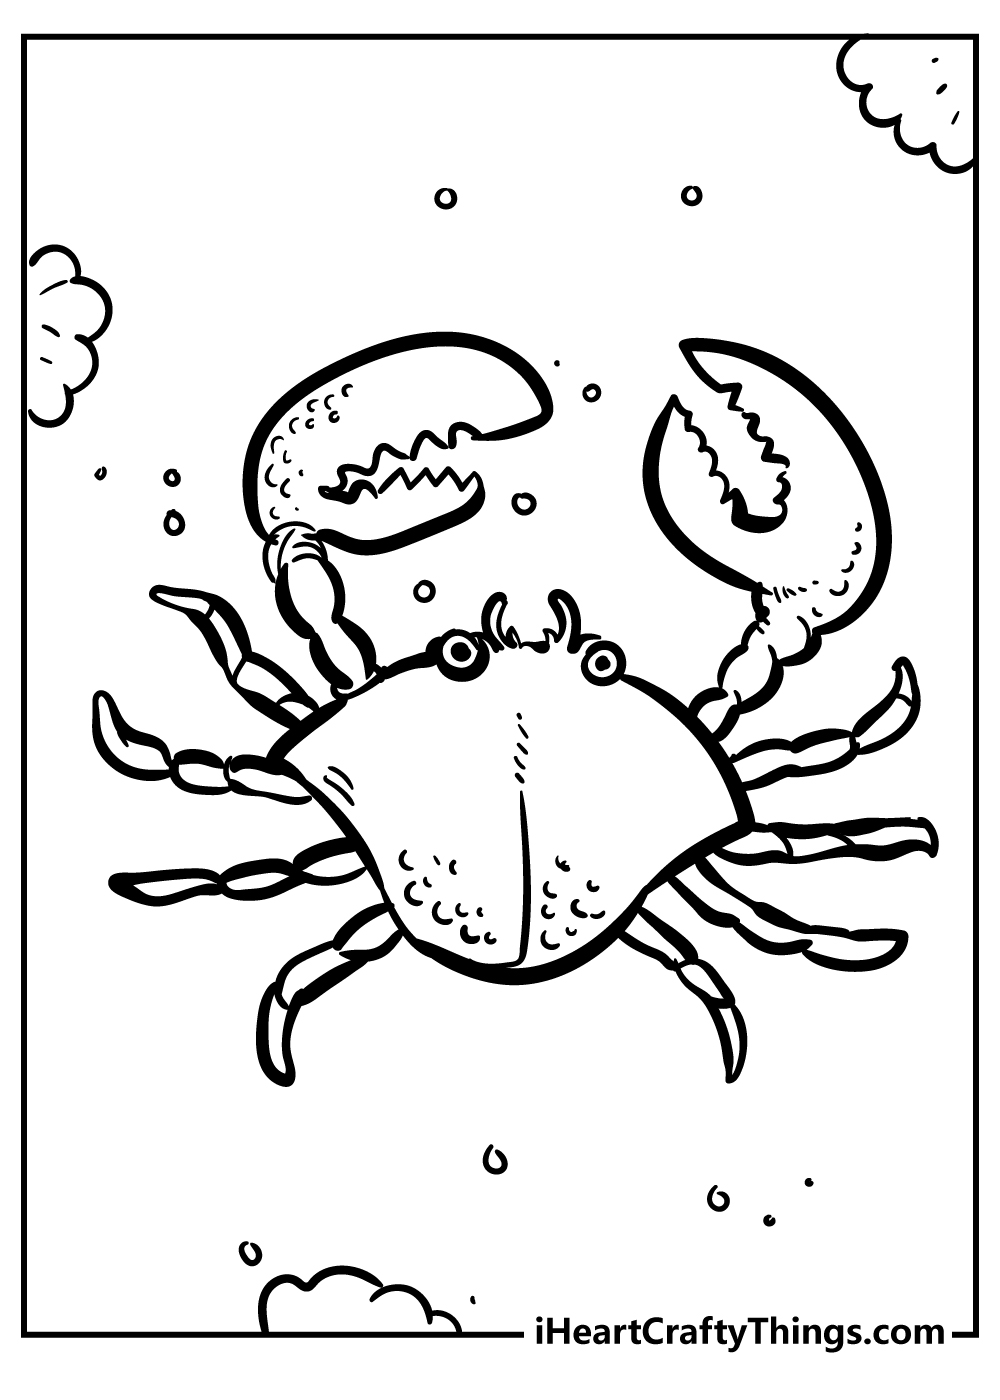 Crab Coloring Pages for adults free printable